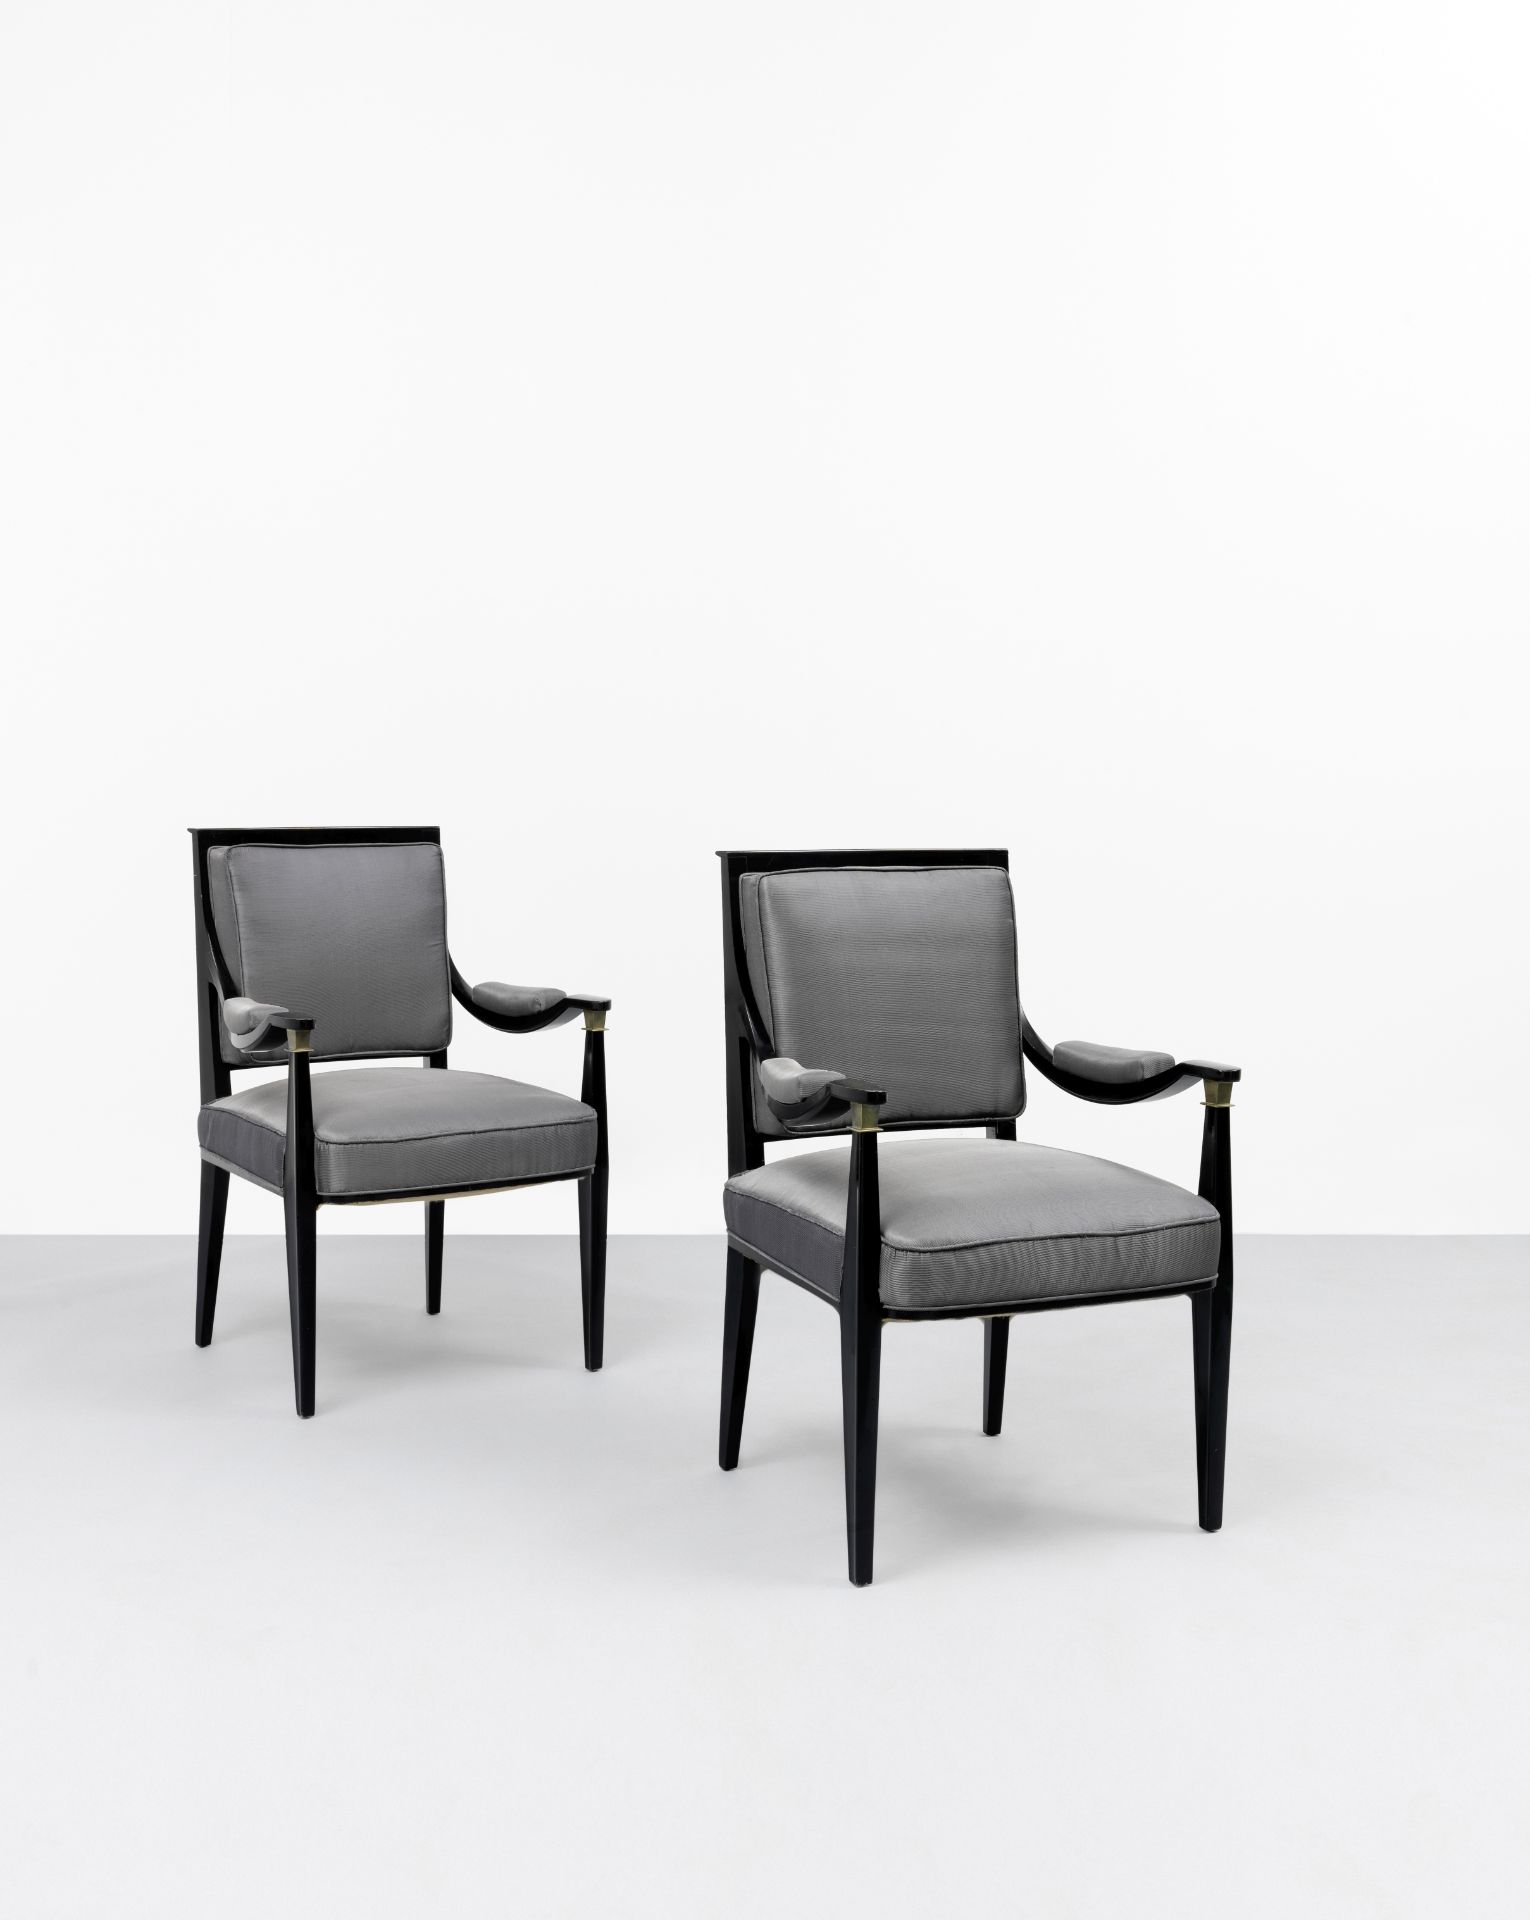 Andr&#233; Arbus Pair of armchairs, designed for president of the Chambre Syndicale de la Siderur...